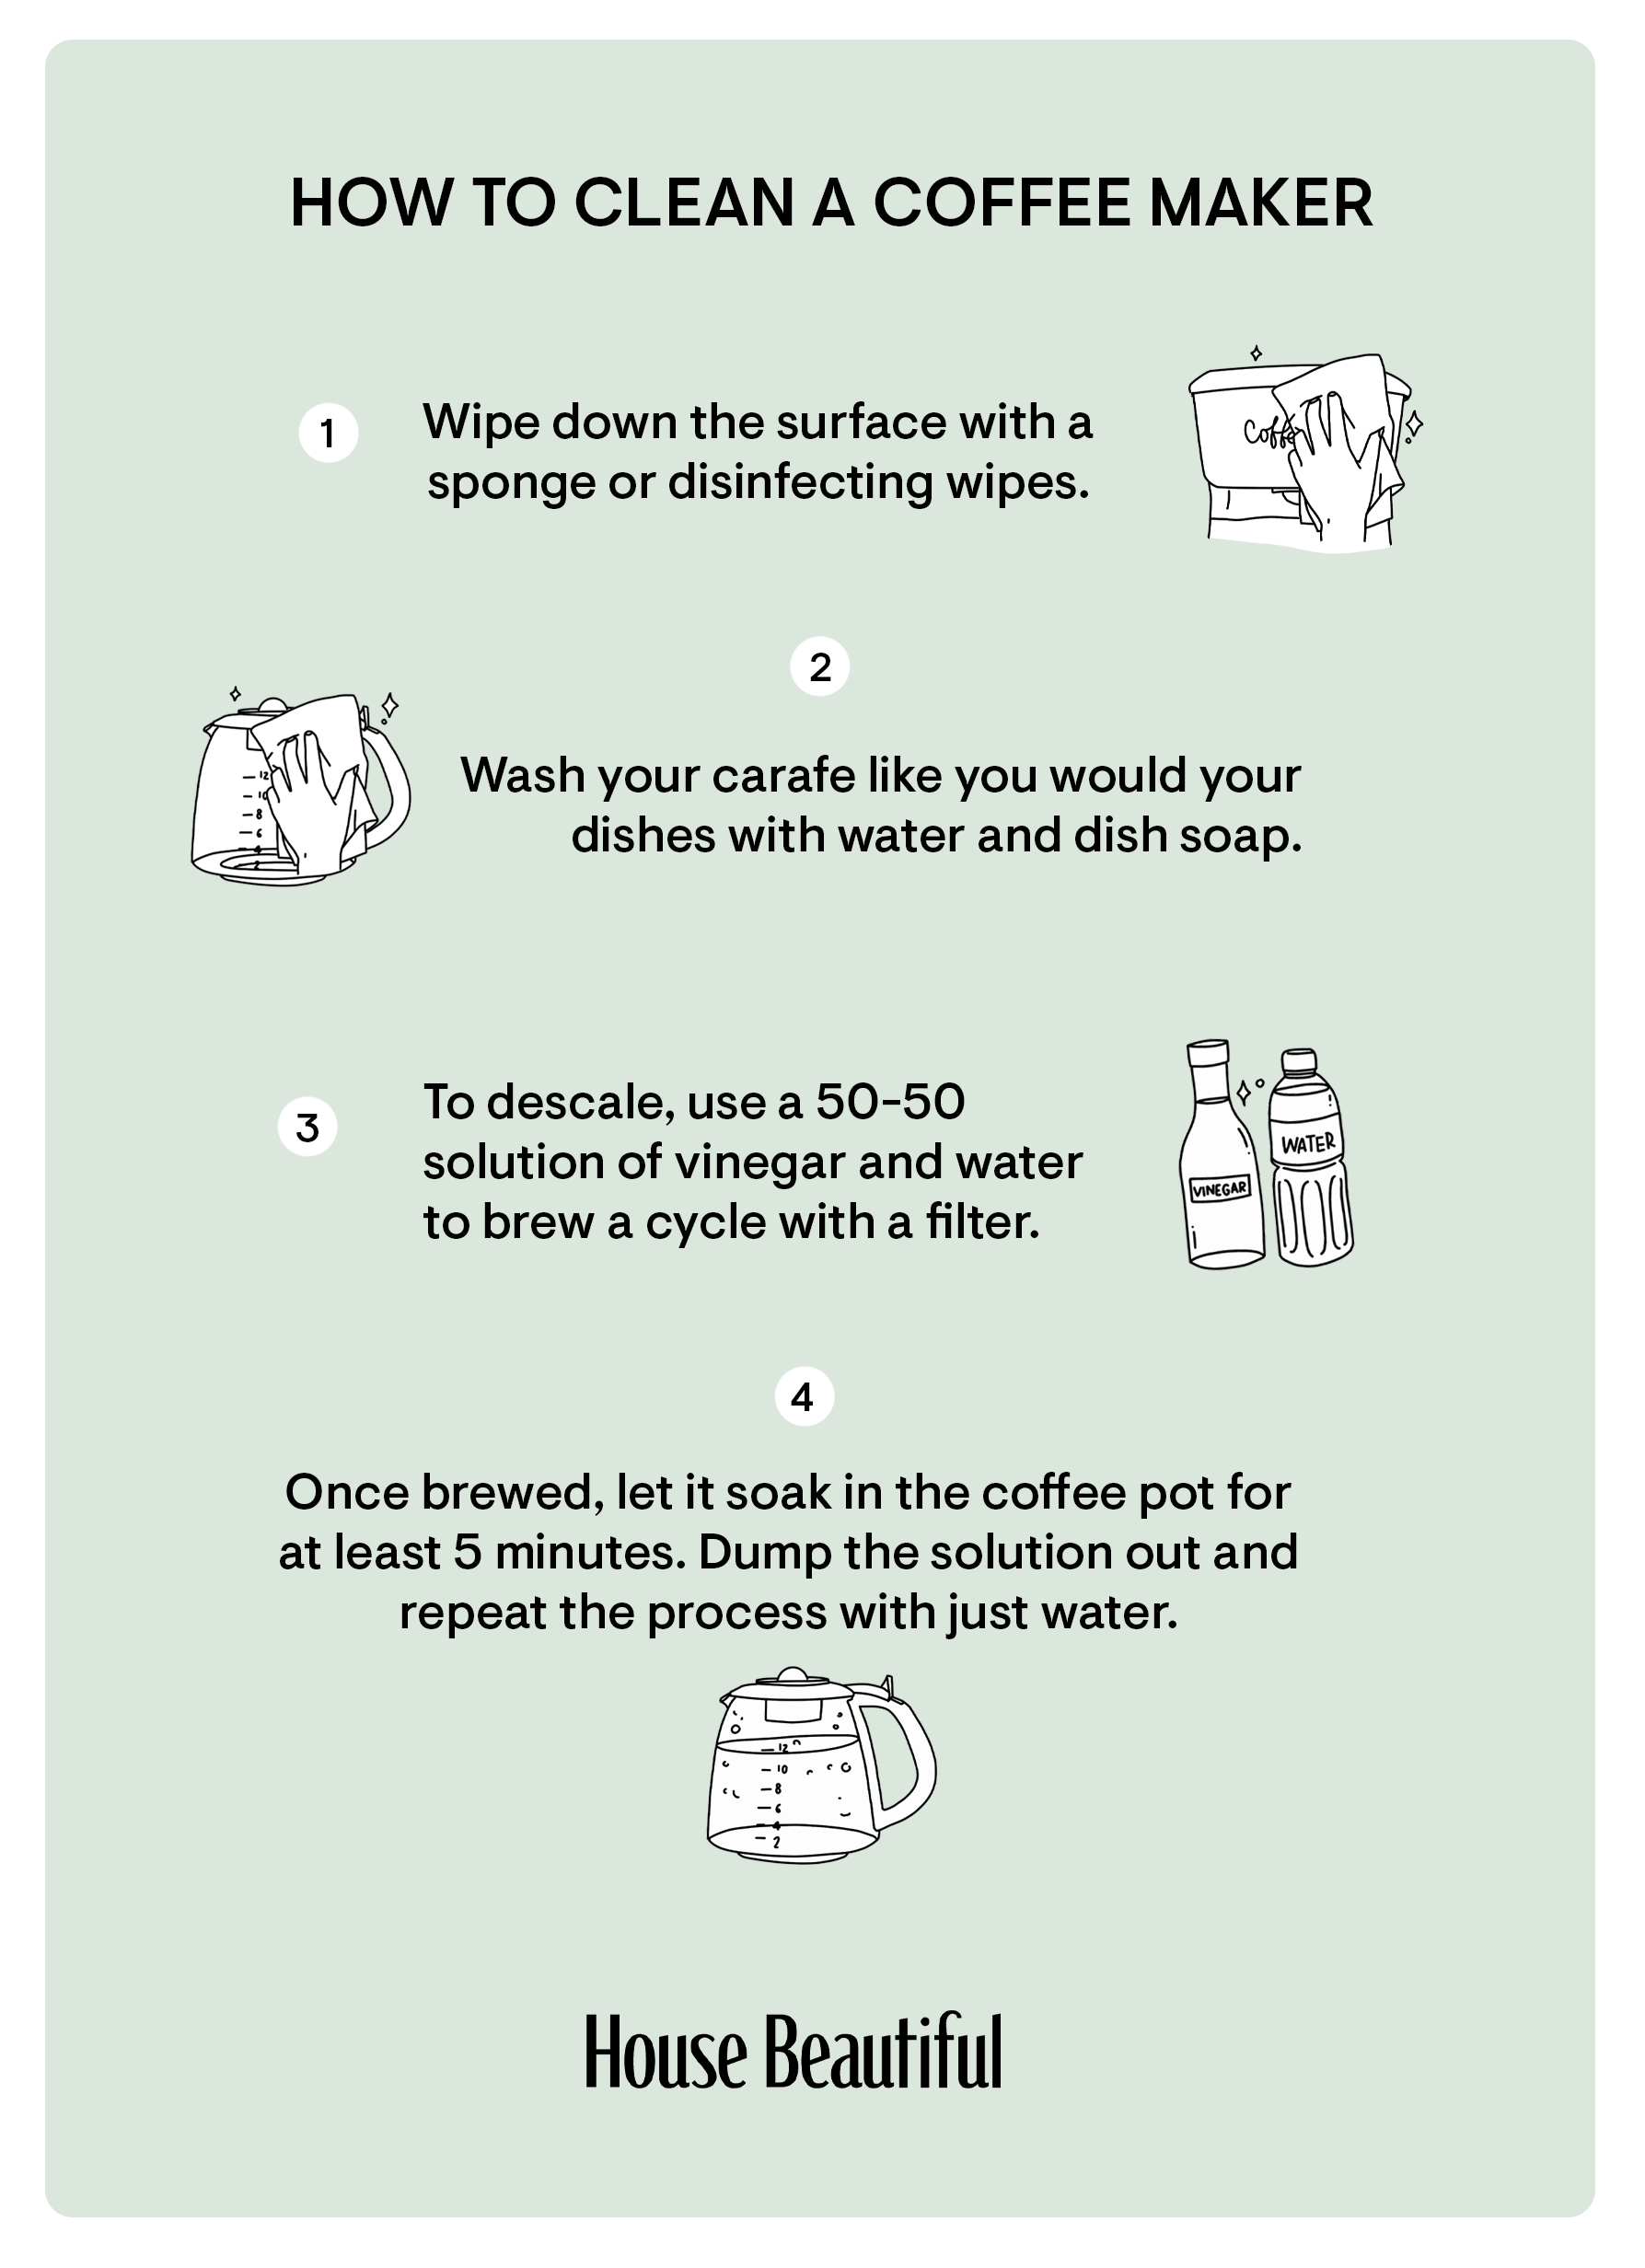 How to Clean your Carafe 